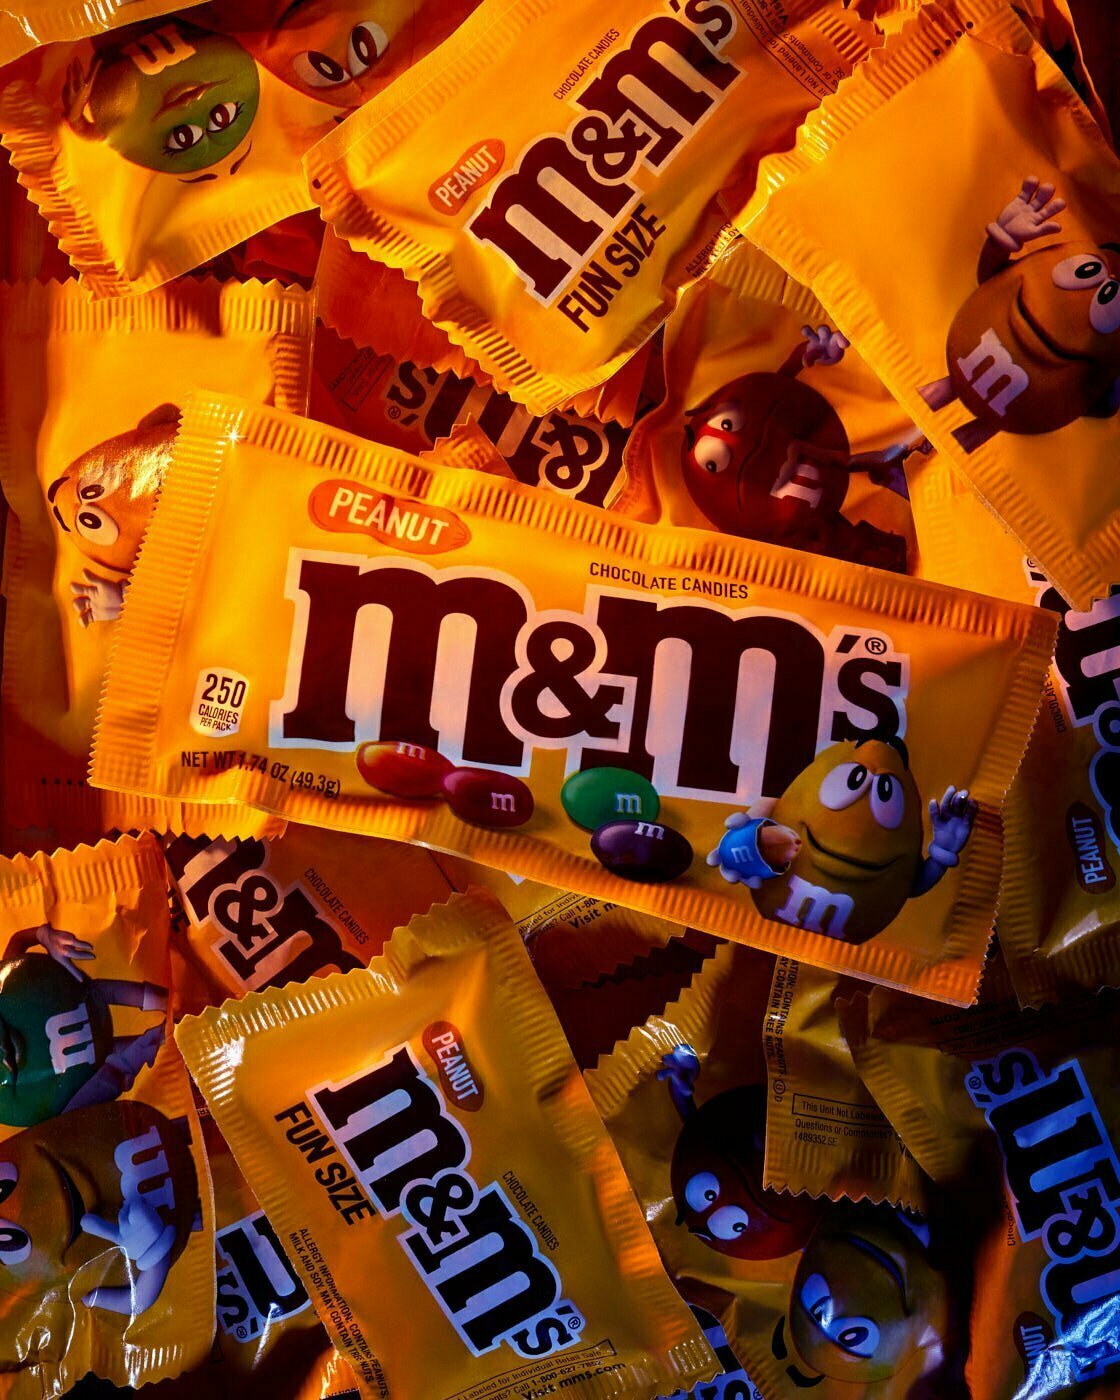 A full size Peanut M&M candy still in wrapper sitting on top of mini Peanut M&M candy also still in their wrappers.